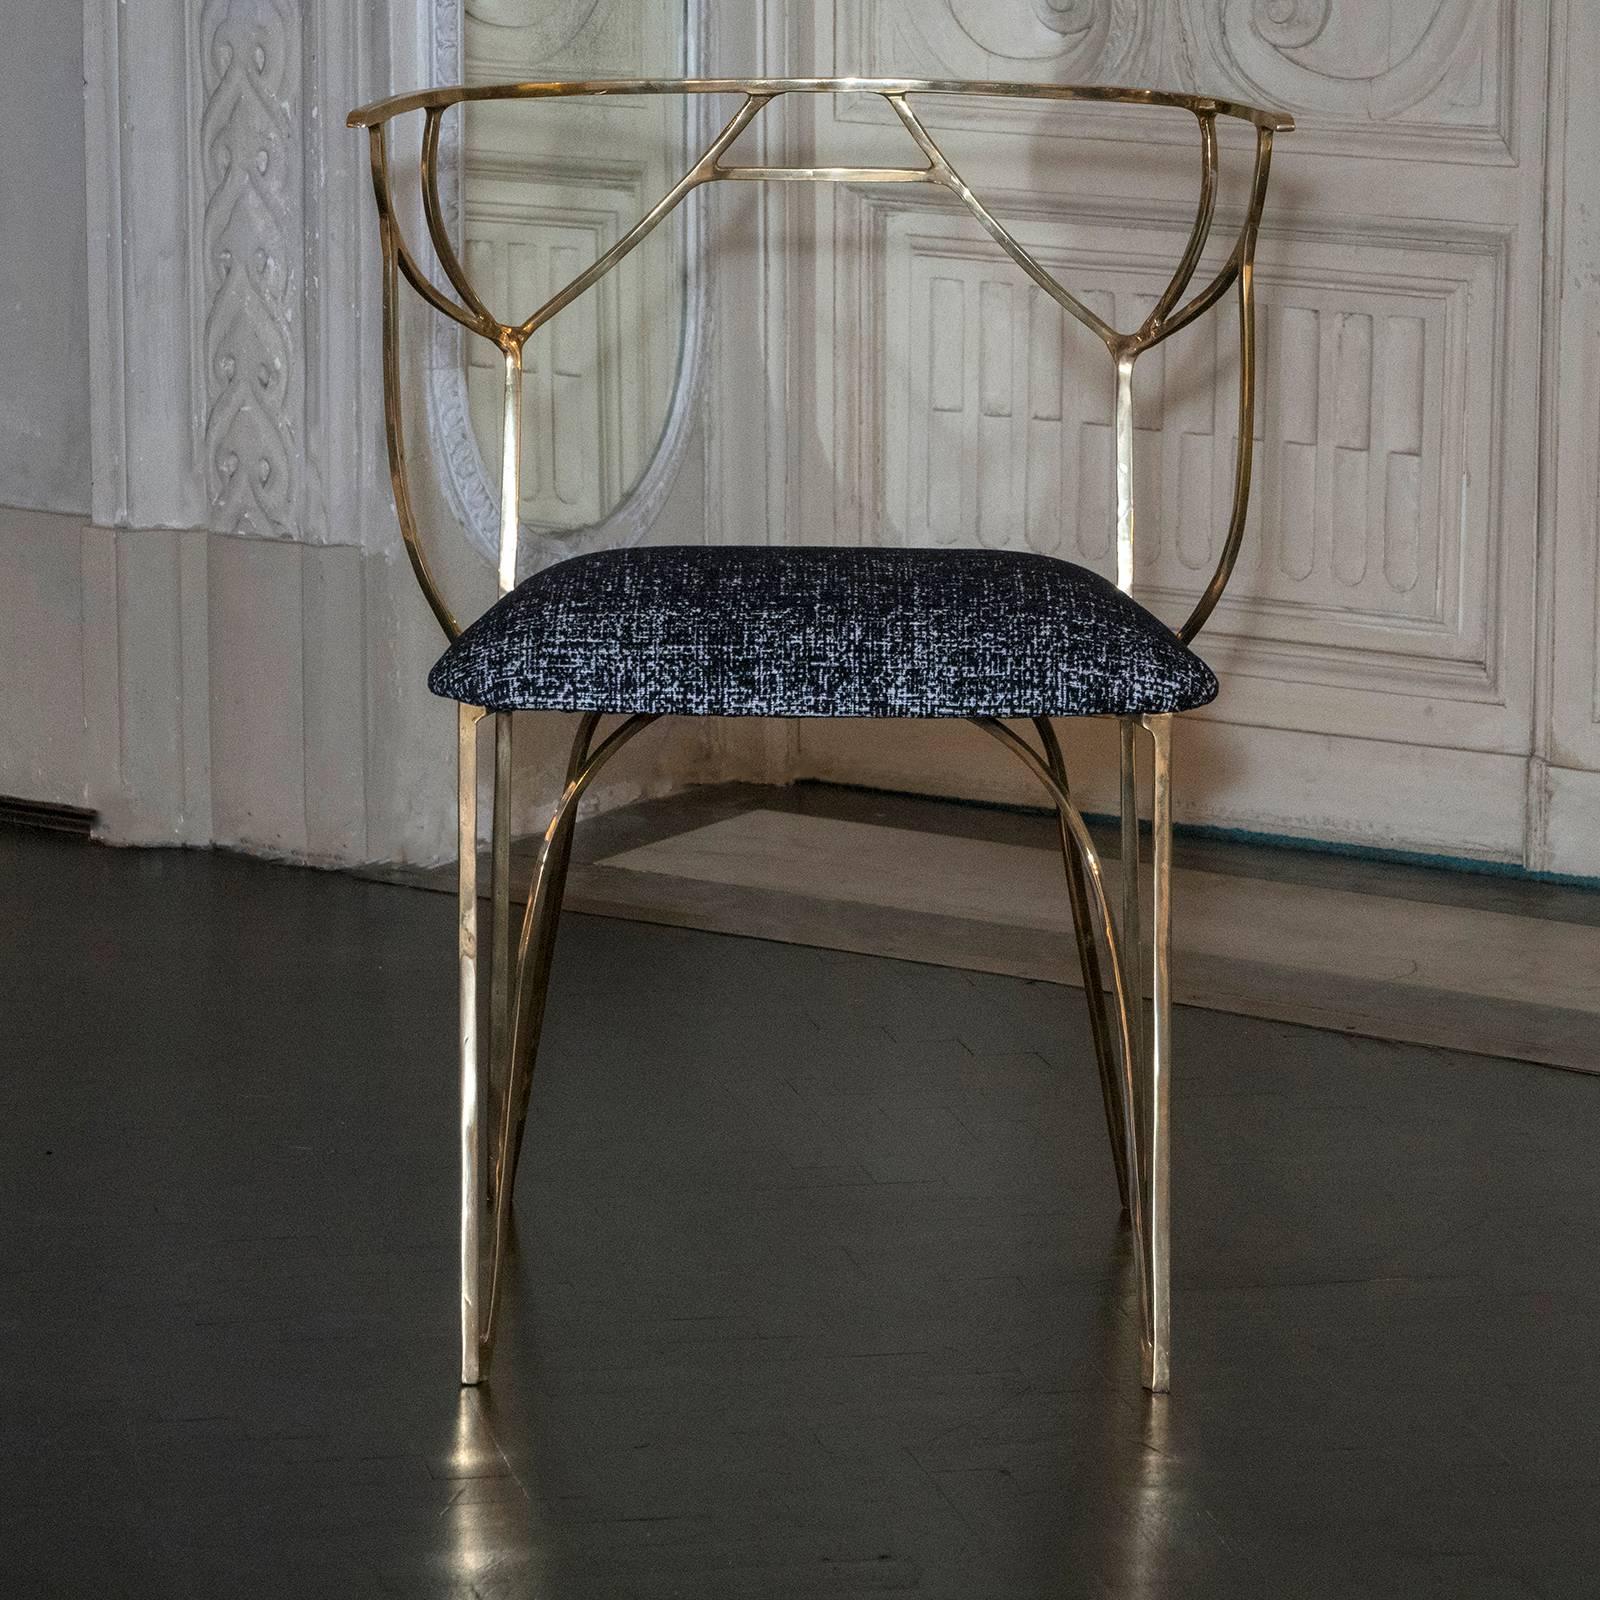 Sculptural dining chairs realized in gilded bronze, black and white velvet seat cushion.